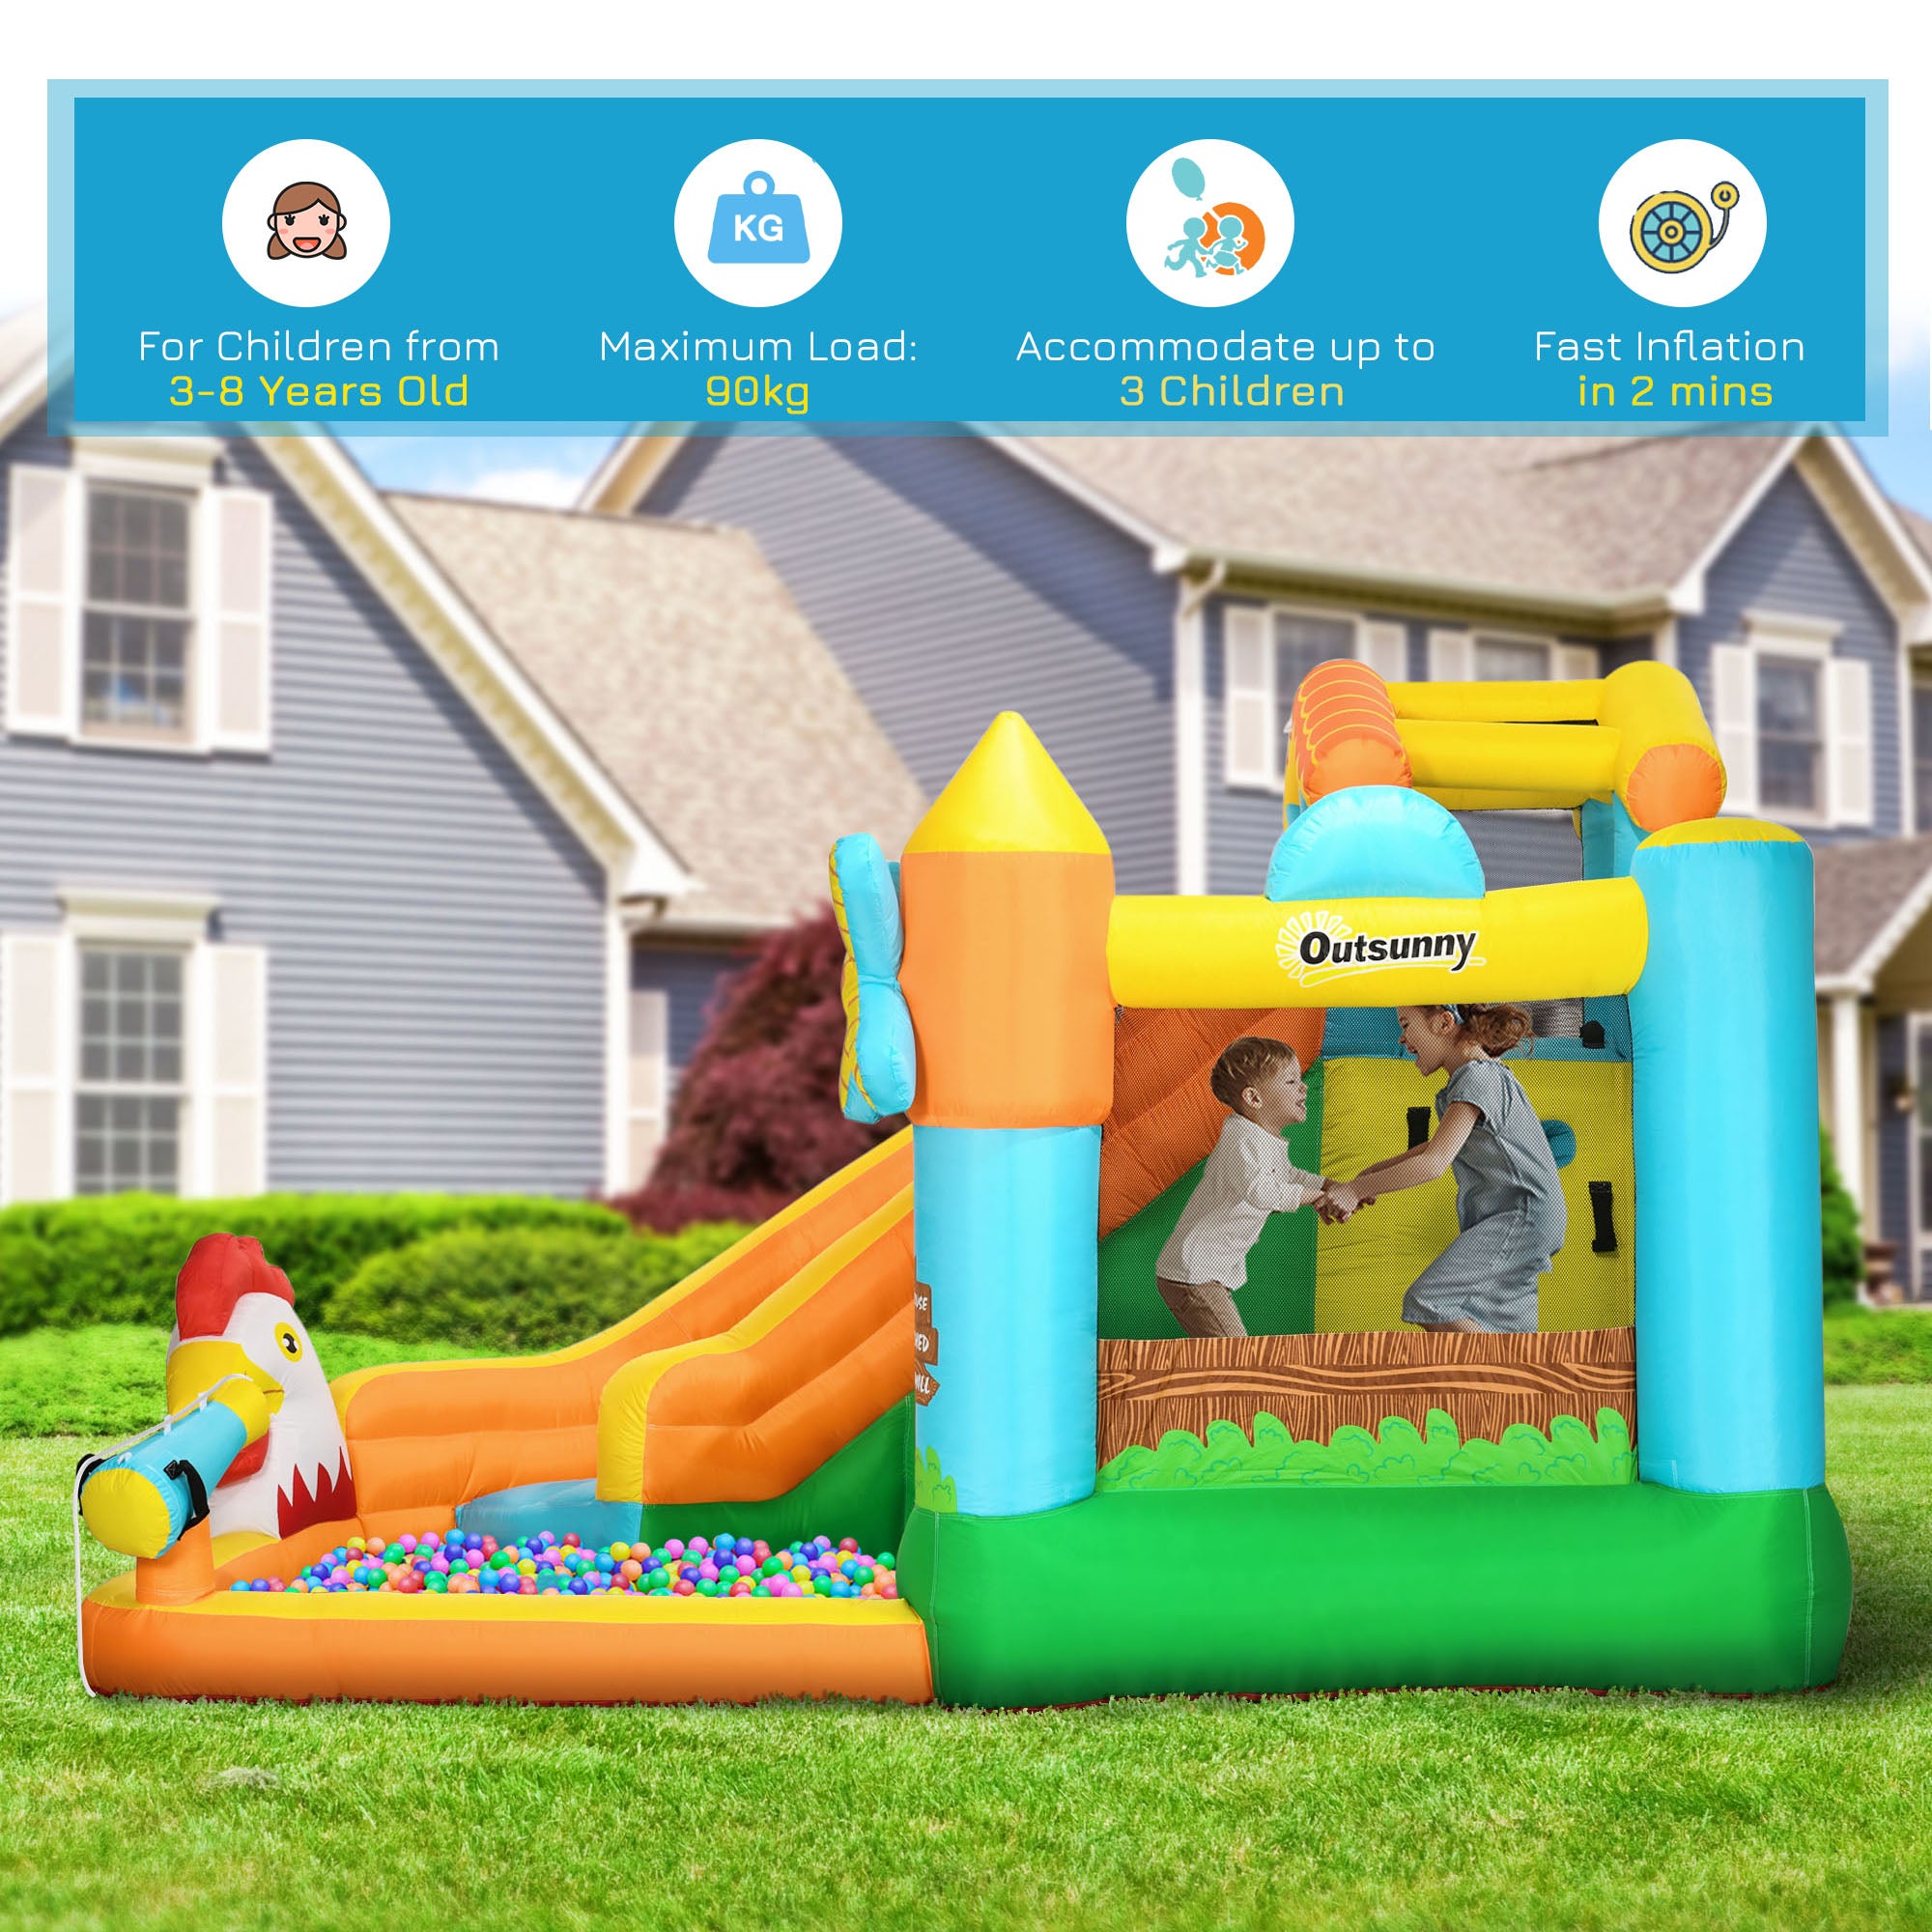 Outsunny 5 in 1 Kids Bounce Castle Farm Style Inflatable House with Slide Trampoline Pool Water Cannon Climbing Wall Inflator Carry bag for Ages 3-8